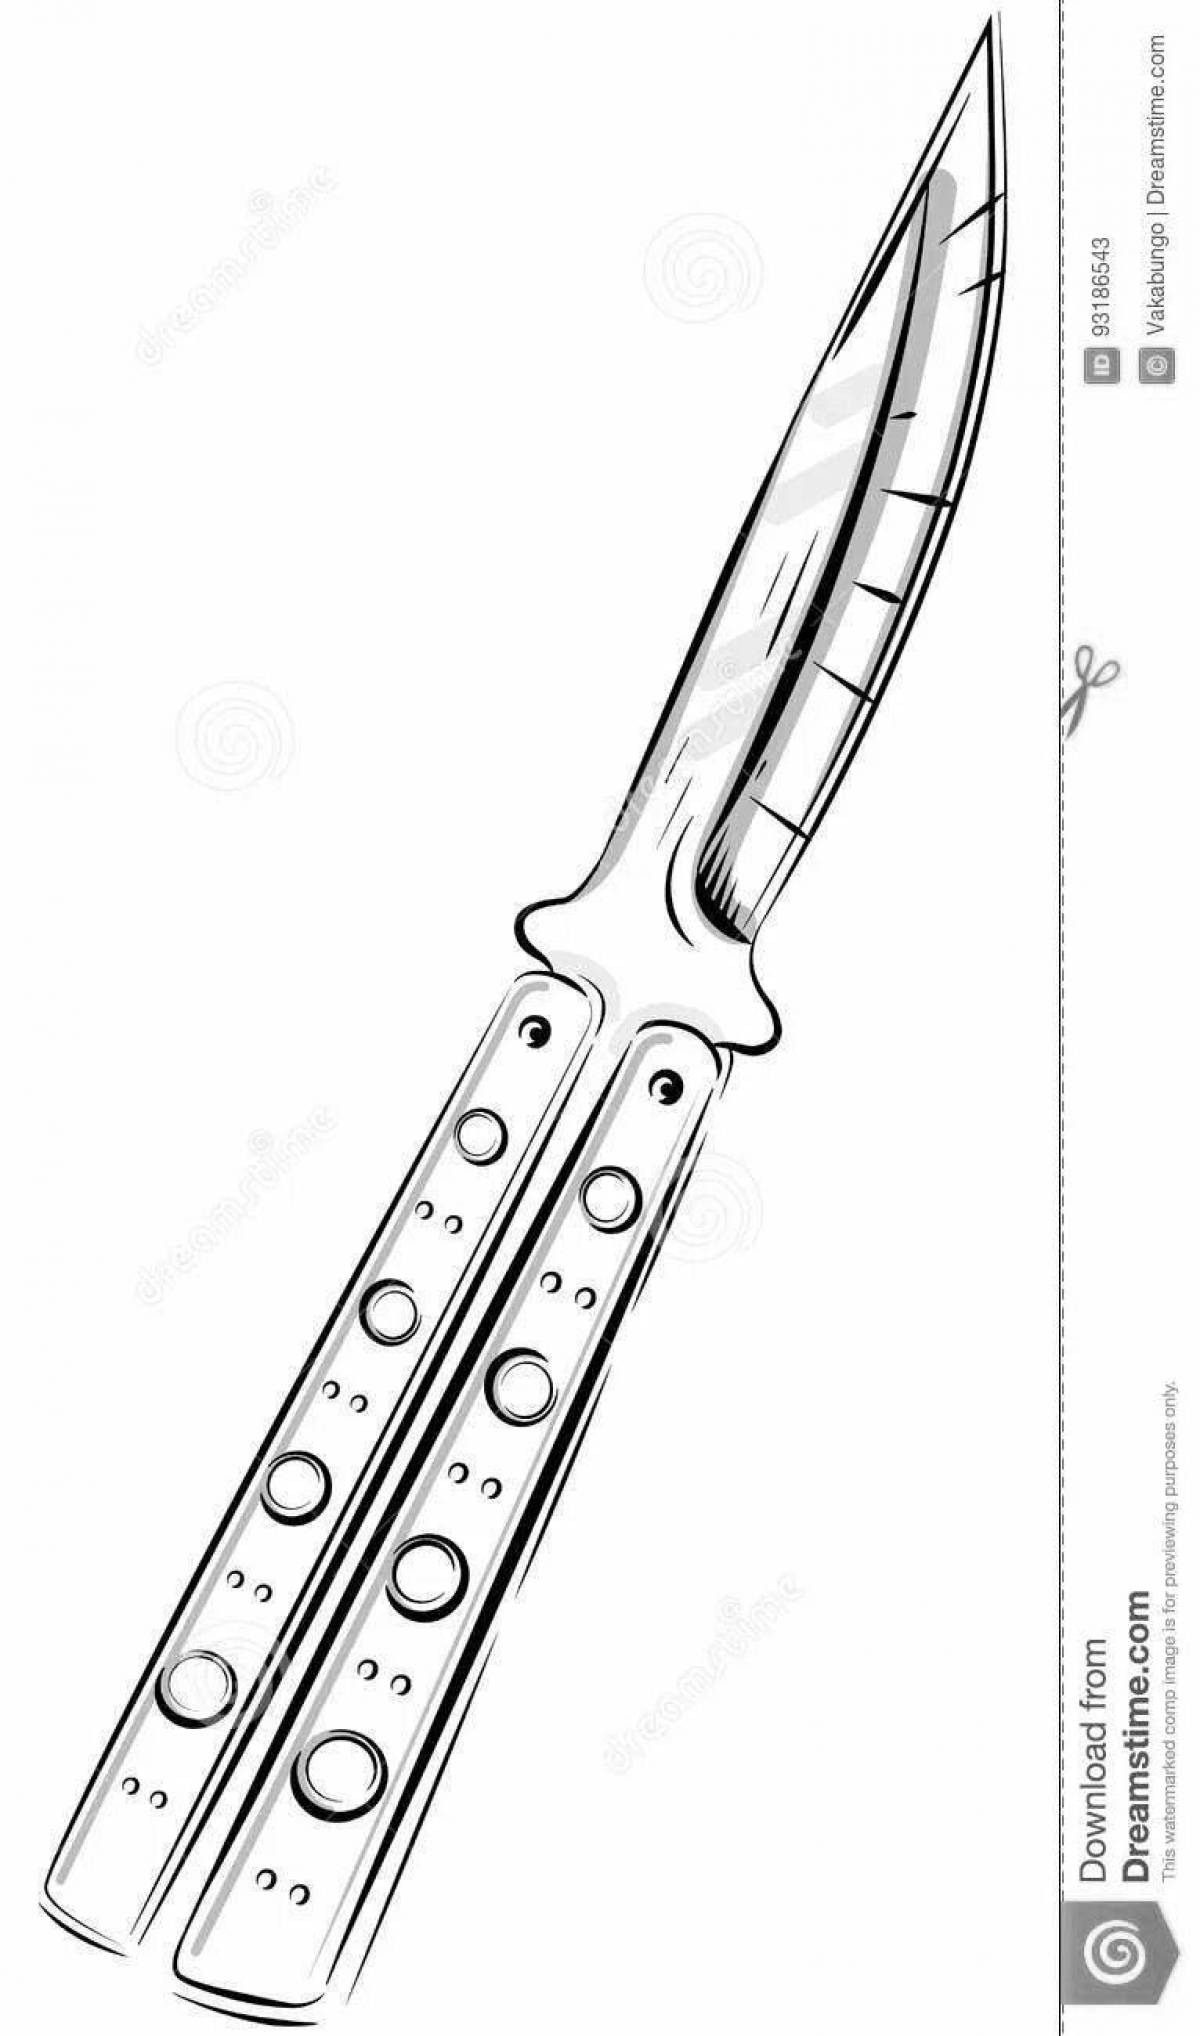 Knife stand coloring page